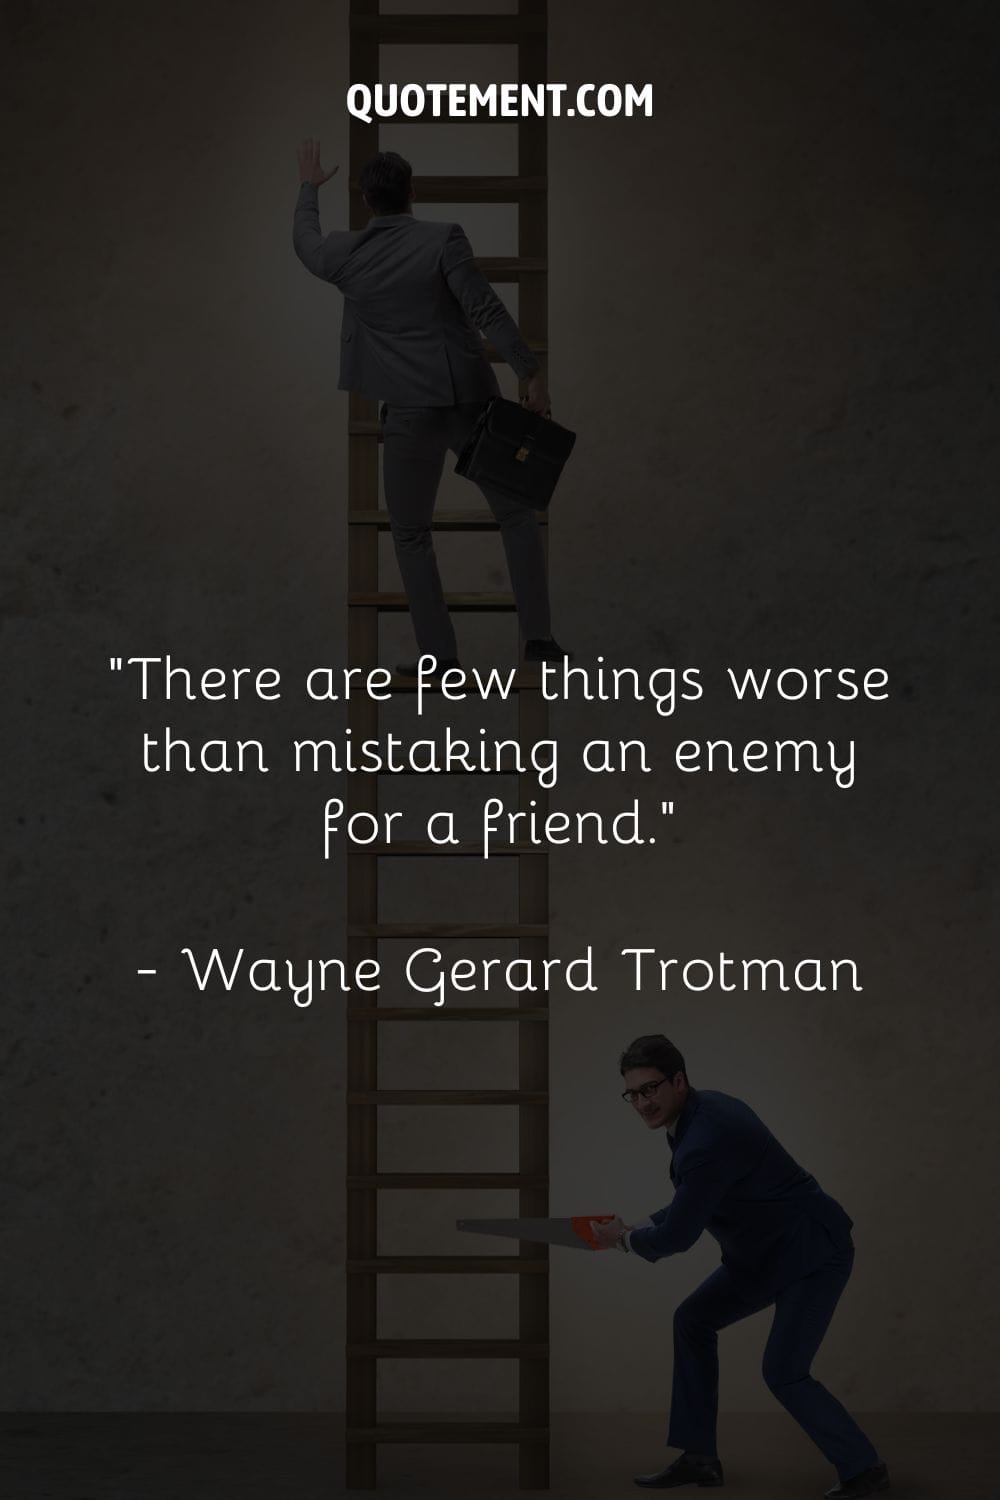 There are few things worse than mistaking an enemy for a friend